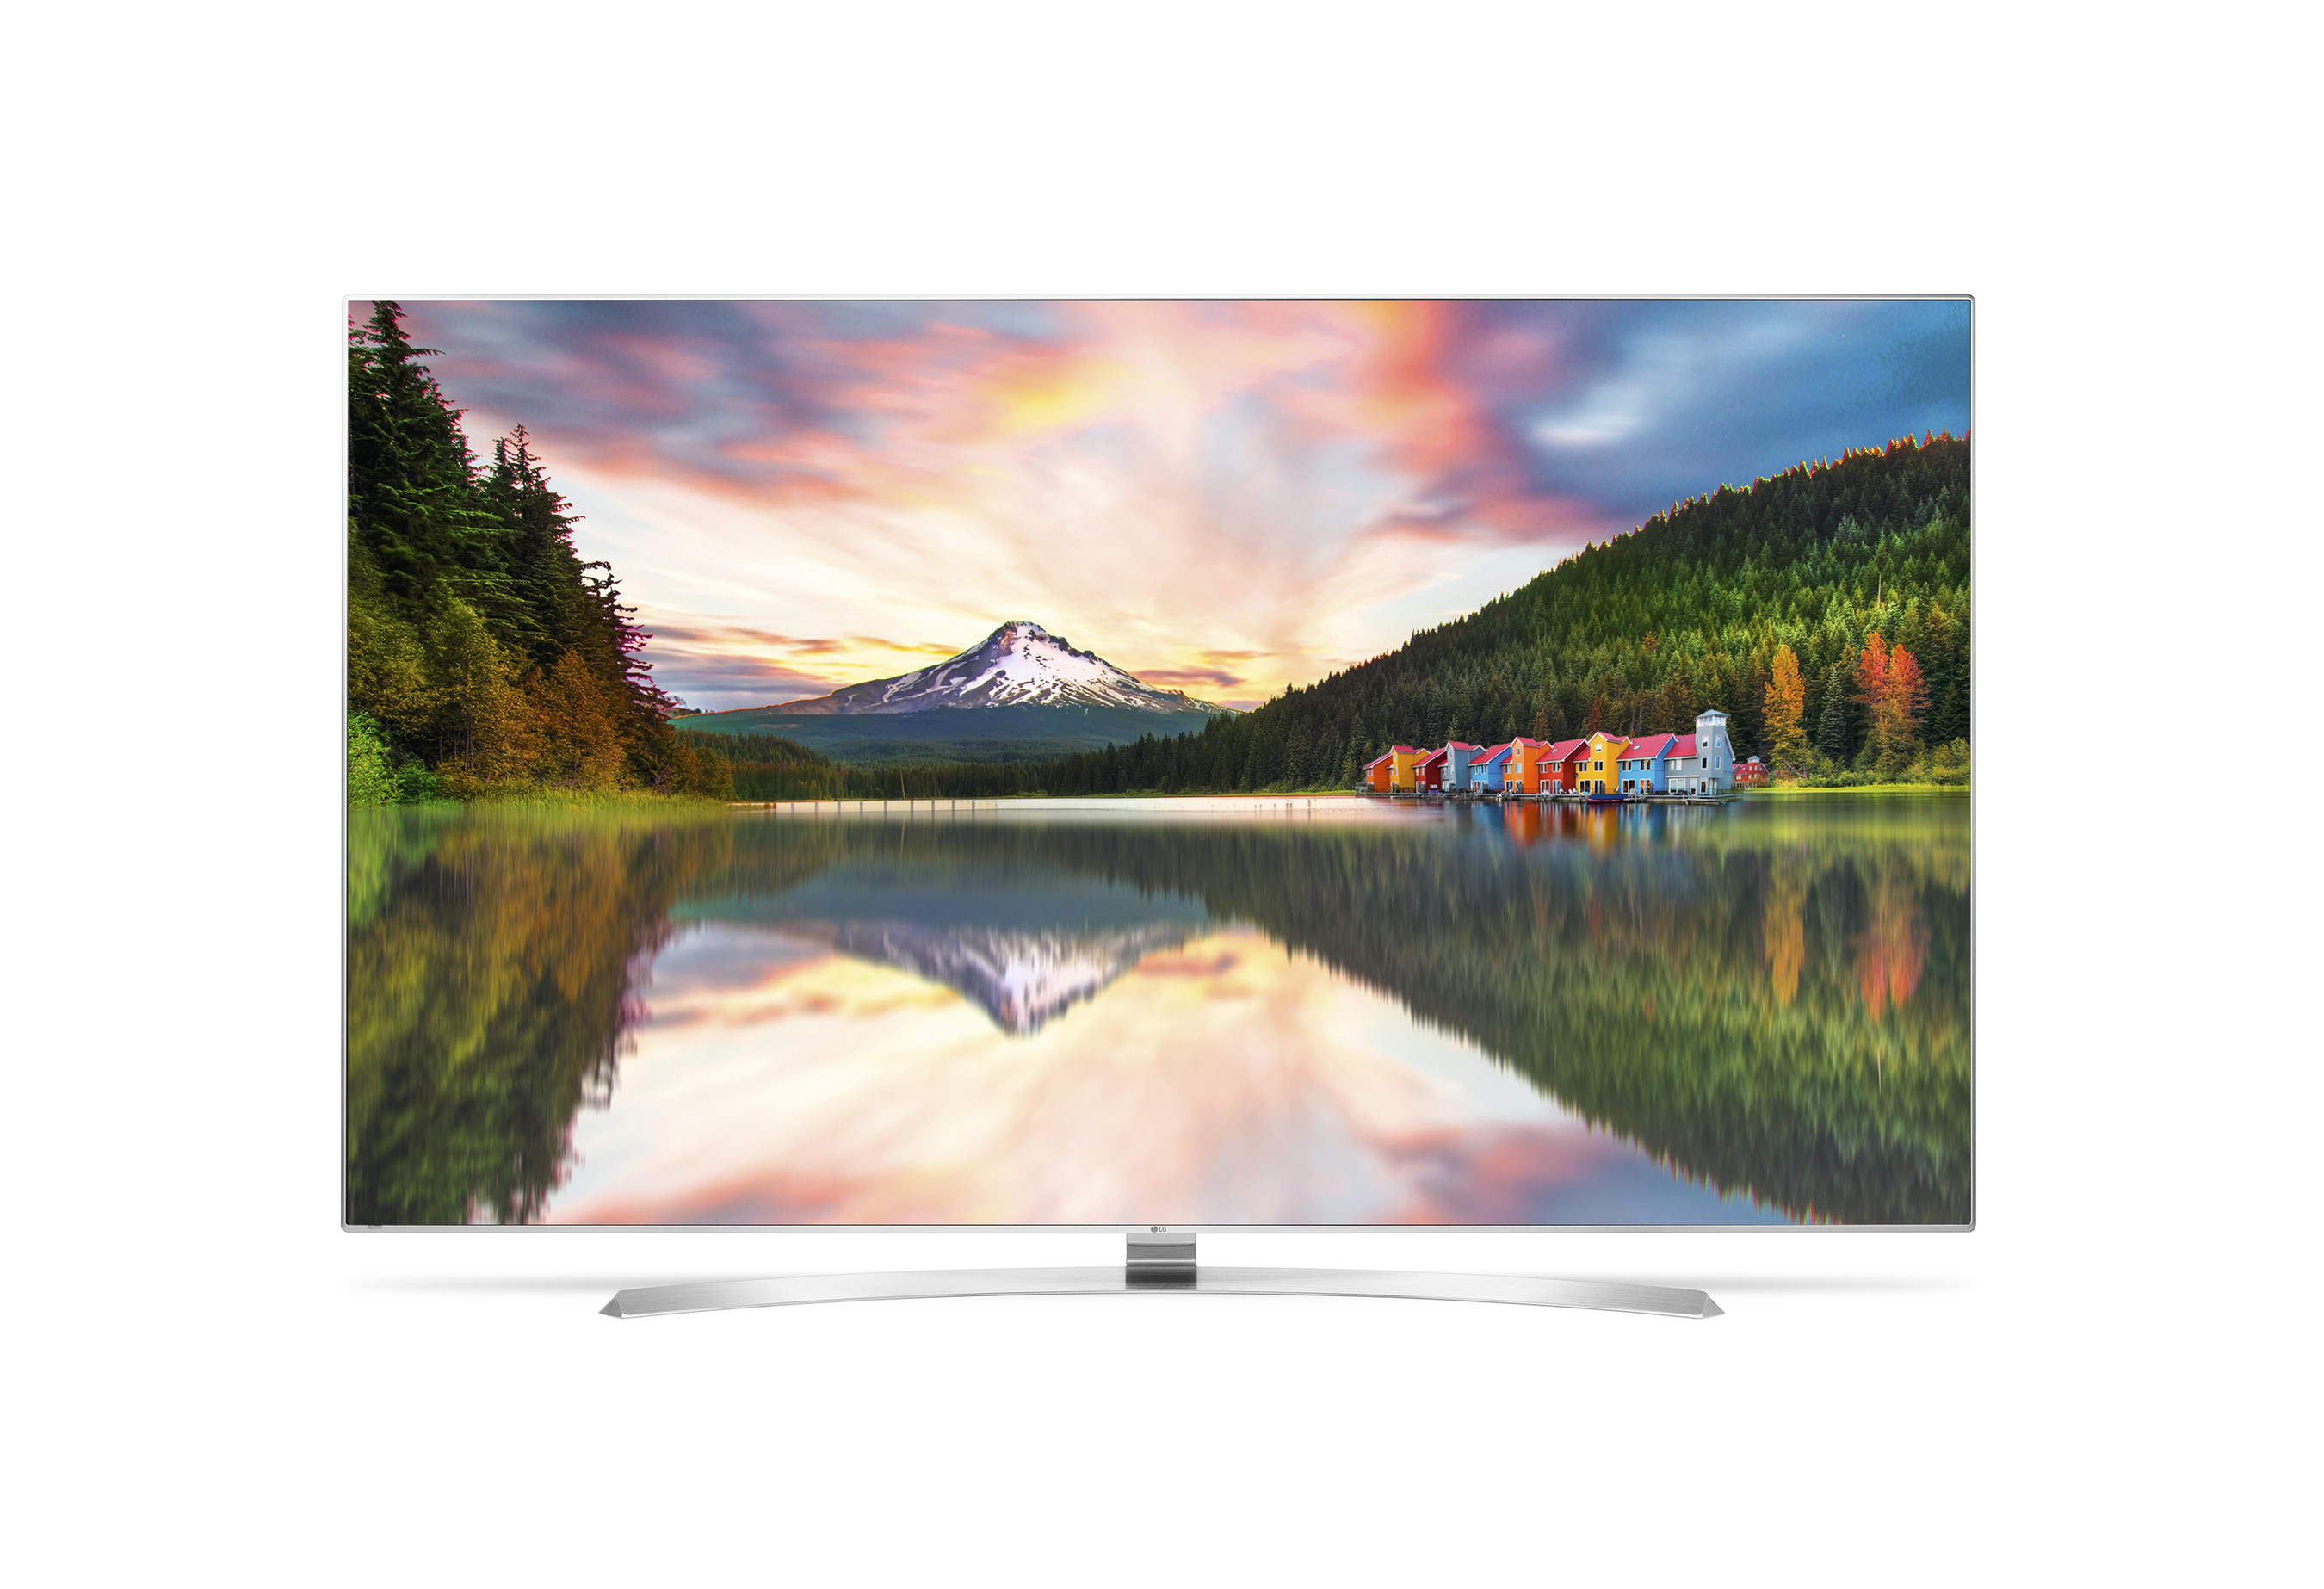 LG Electronics will unveil "LG SUPER UHD," a new premium line of 4K Ultra HD TVs at CES (R) 2016 in Las Vegas next week. Leading the company's 2016 4K Ultra HD LCD/LED TV lineup, LG SUPER UHD TV, which includes the UH9500 pictured, will feature LG's most advanced LCD/LED picture quality ever, with expanded color capabilities, advanced picture and sound-enhancing features including high dynamic range (HDR) and LG's alluring Flat ULTRA Slim design.